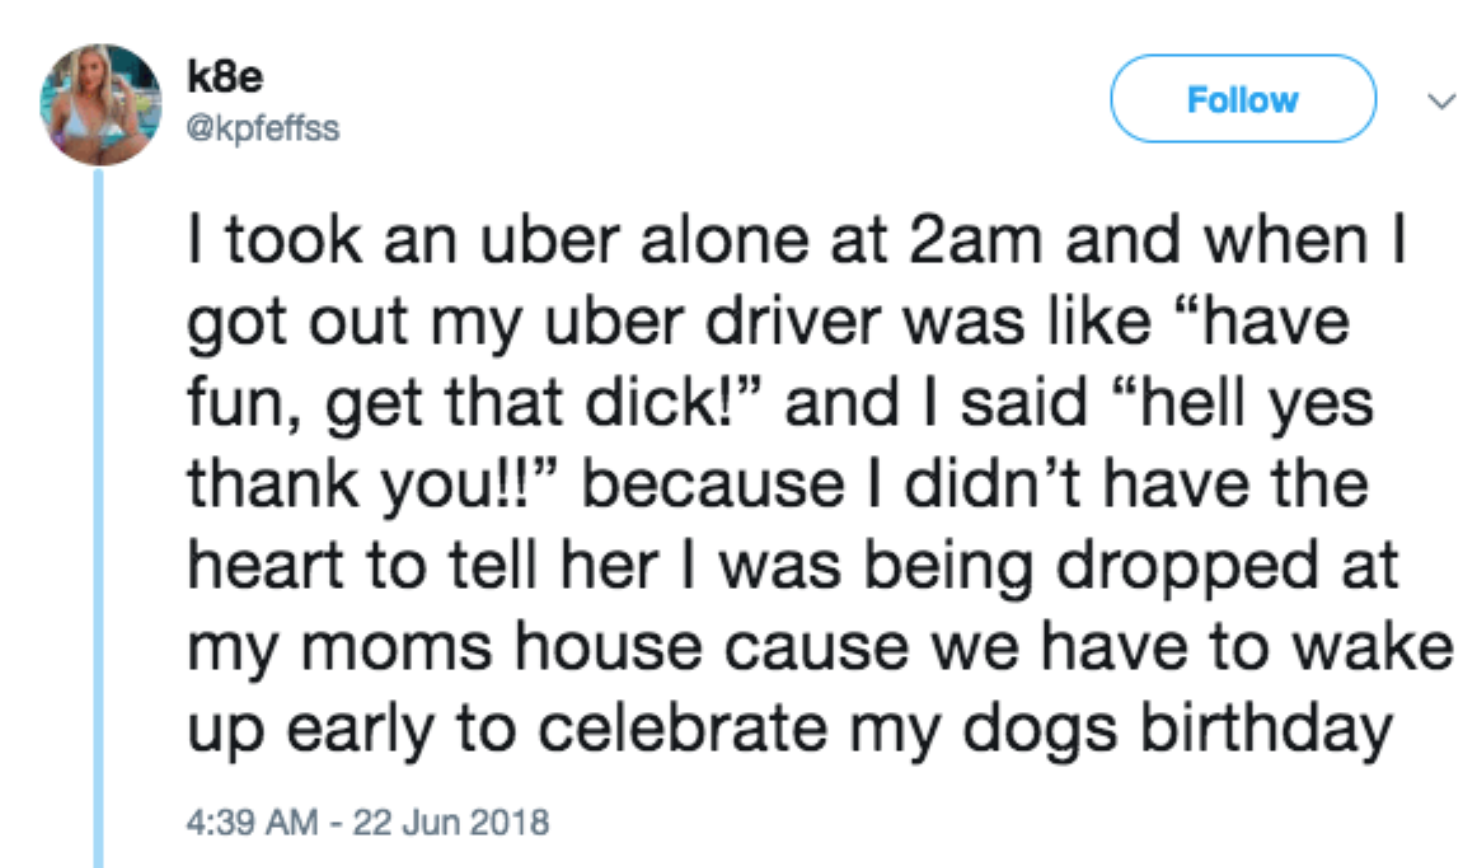 document - ke I took an uber alone at 2am and when I got out my uber driver was have fun, get that dick!" and I said "hell yes thank you!! because I didn't have the heart to tell her I was being dropped at my moms house cause we have to wake up early to c